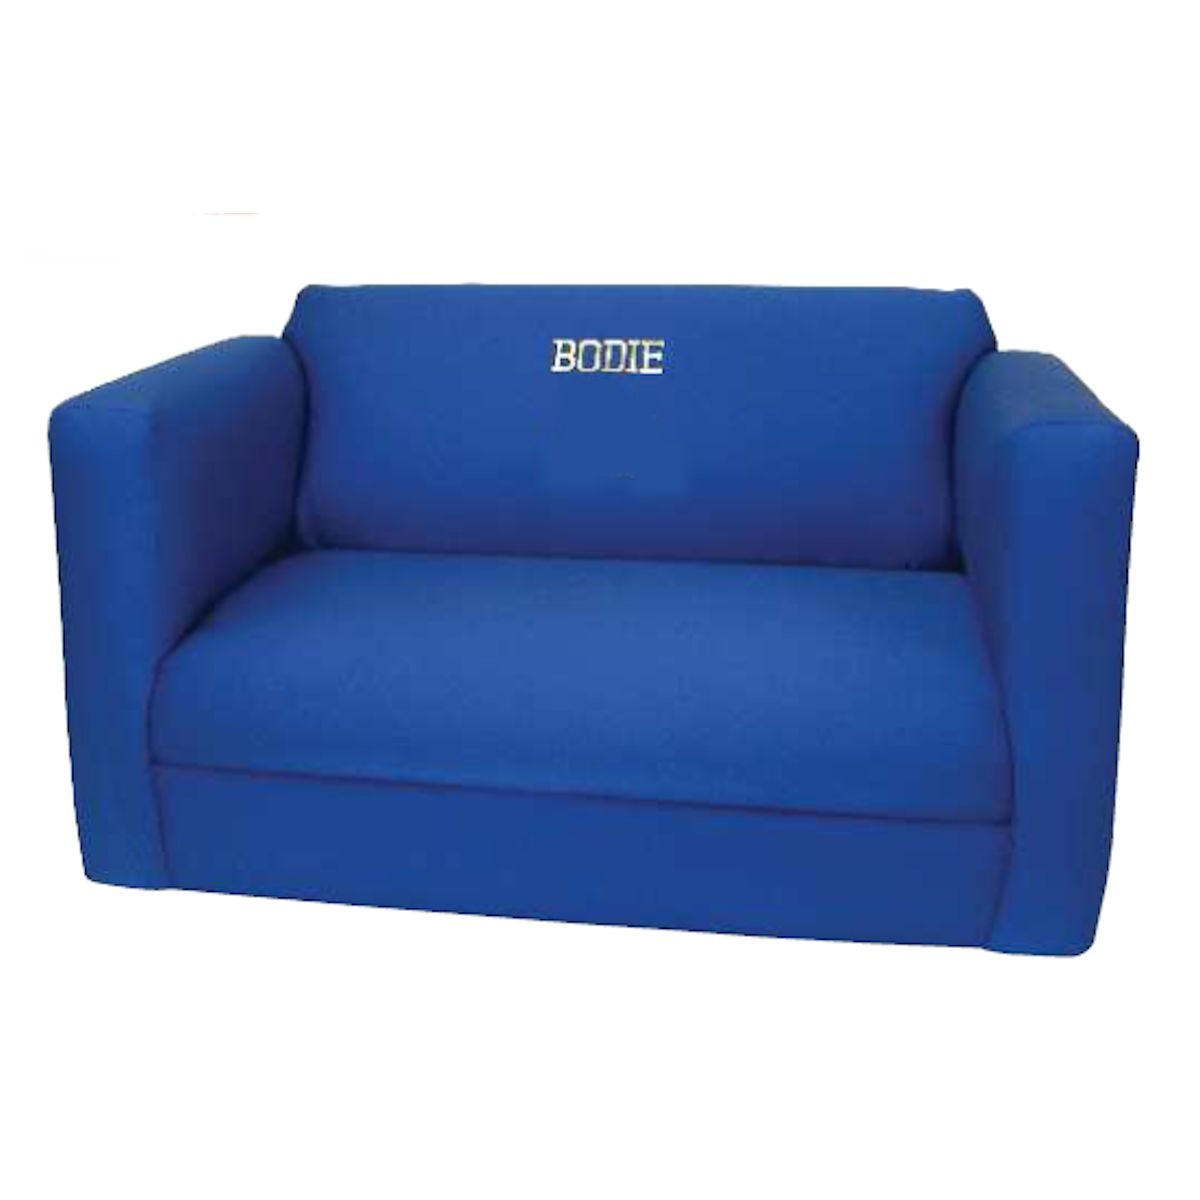 Kids Sofa And Chair
 Kid s Sofa Kids Sofas & Couches